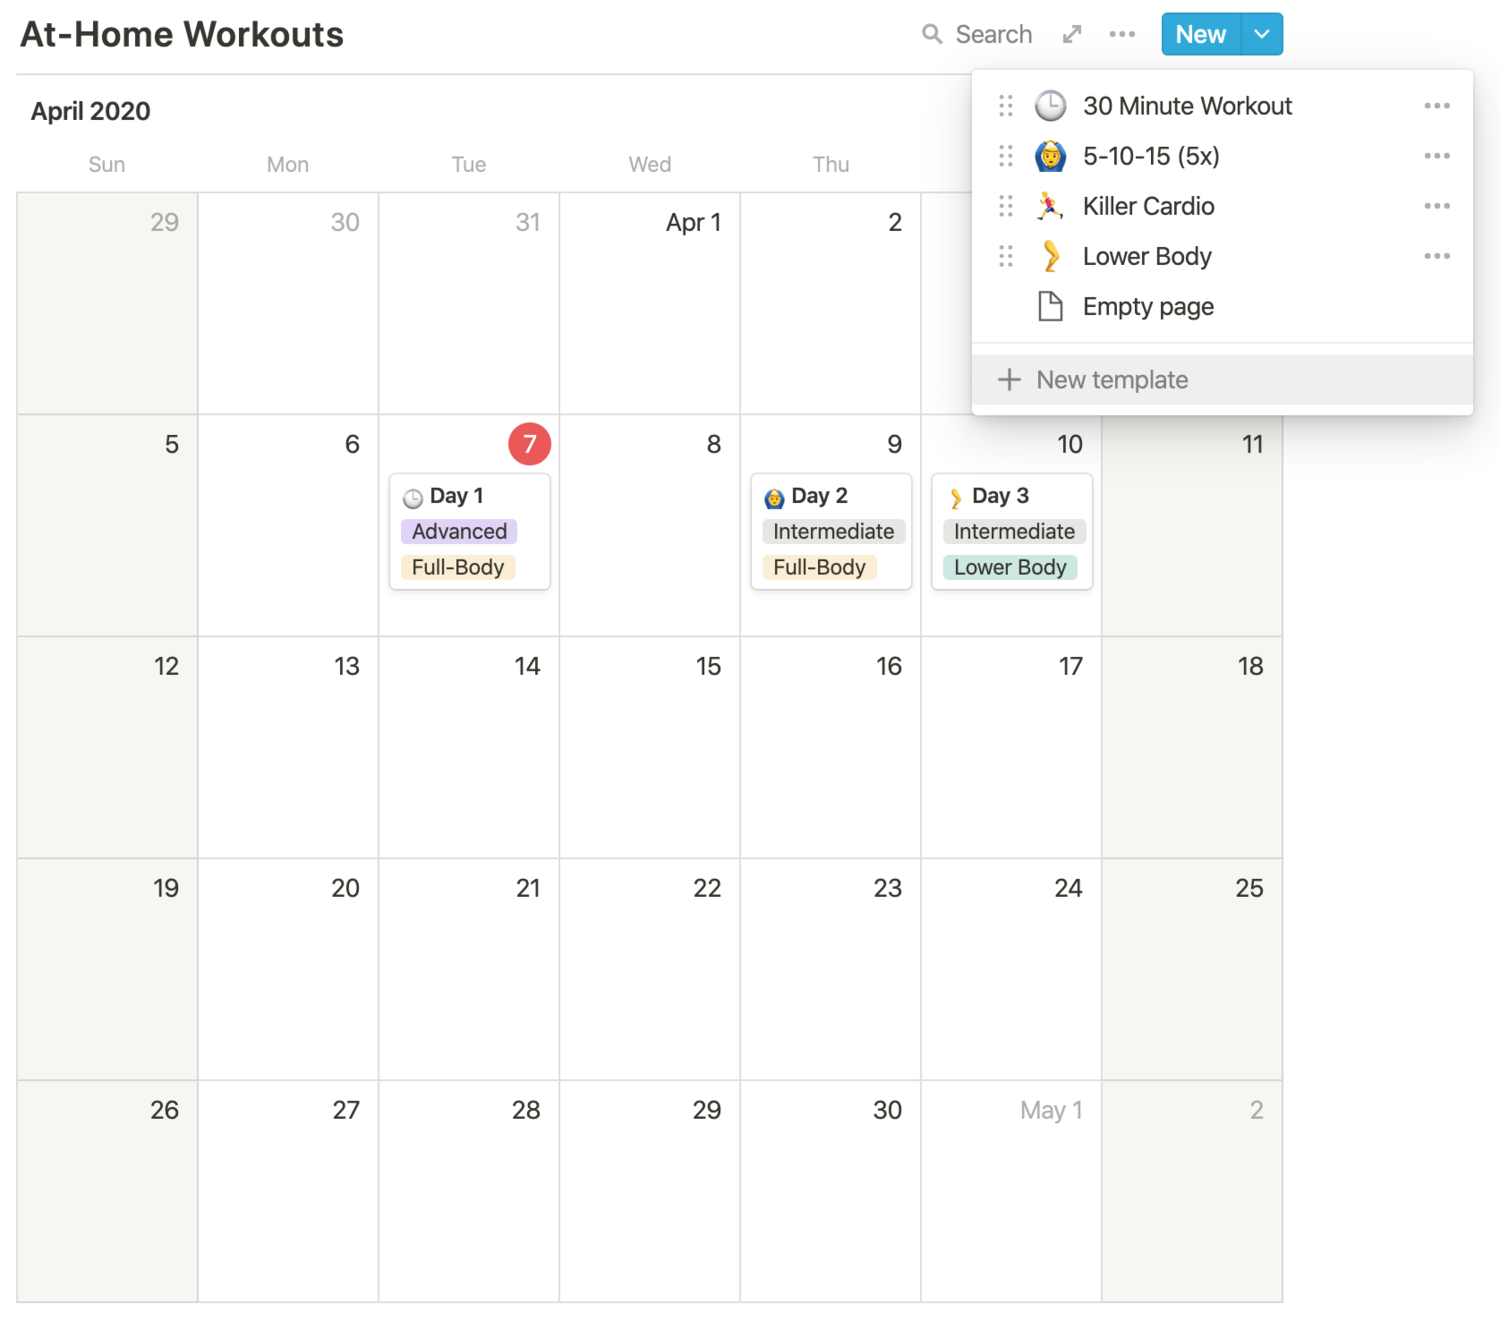 notion-fitness-calendar-with-at-home-workout-templates-red-gregory